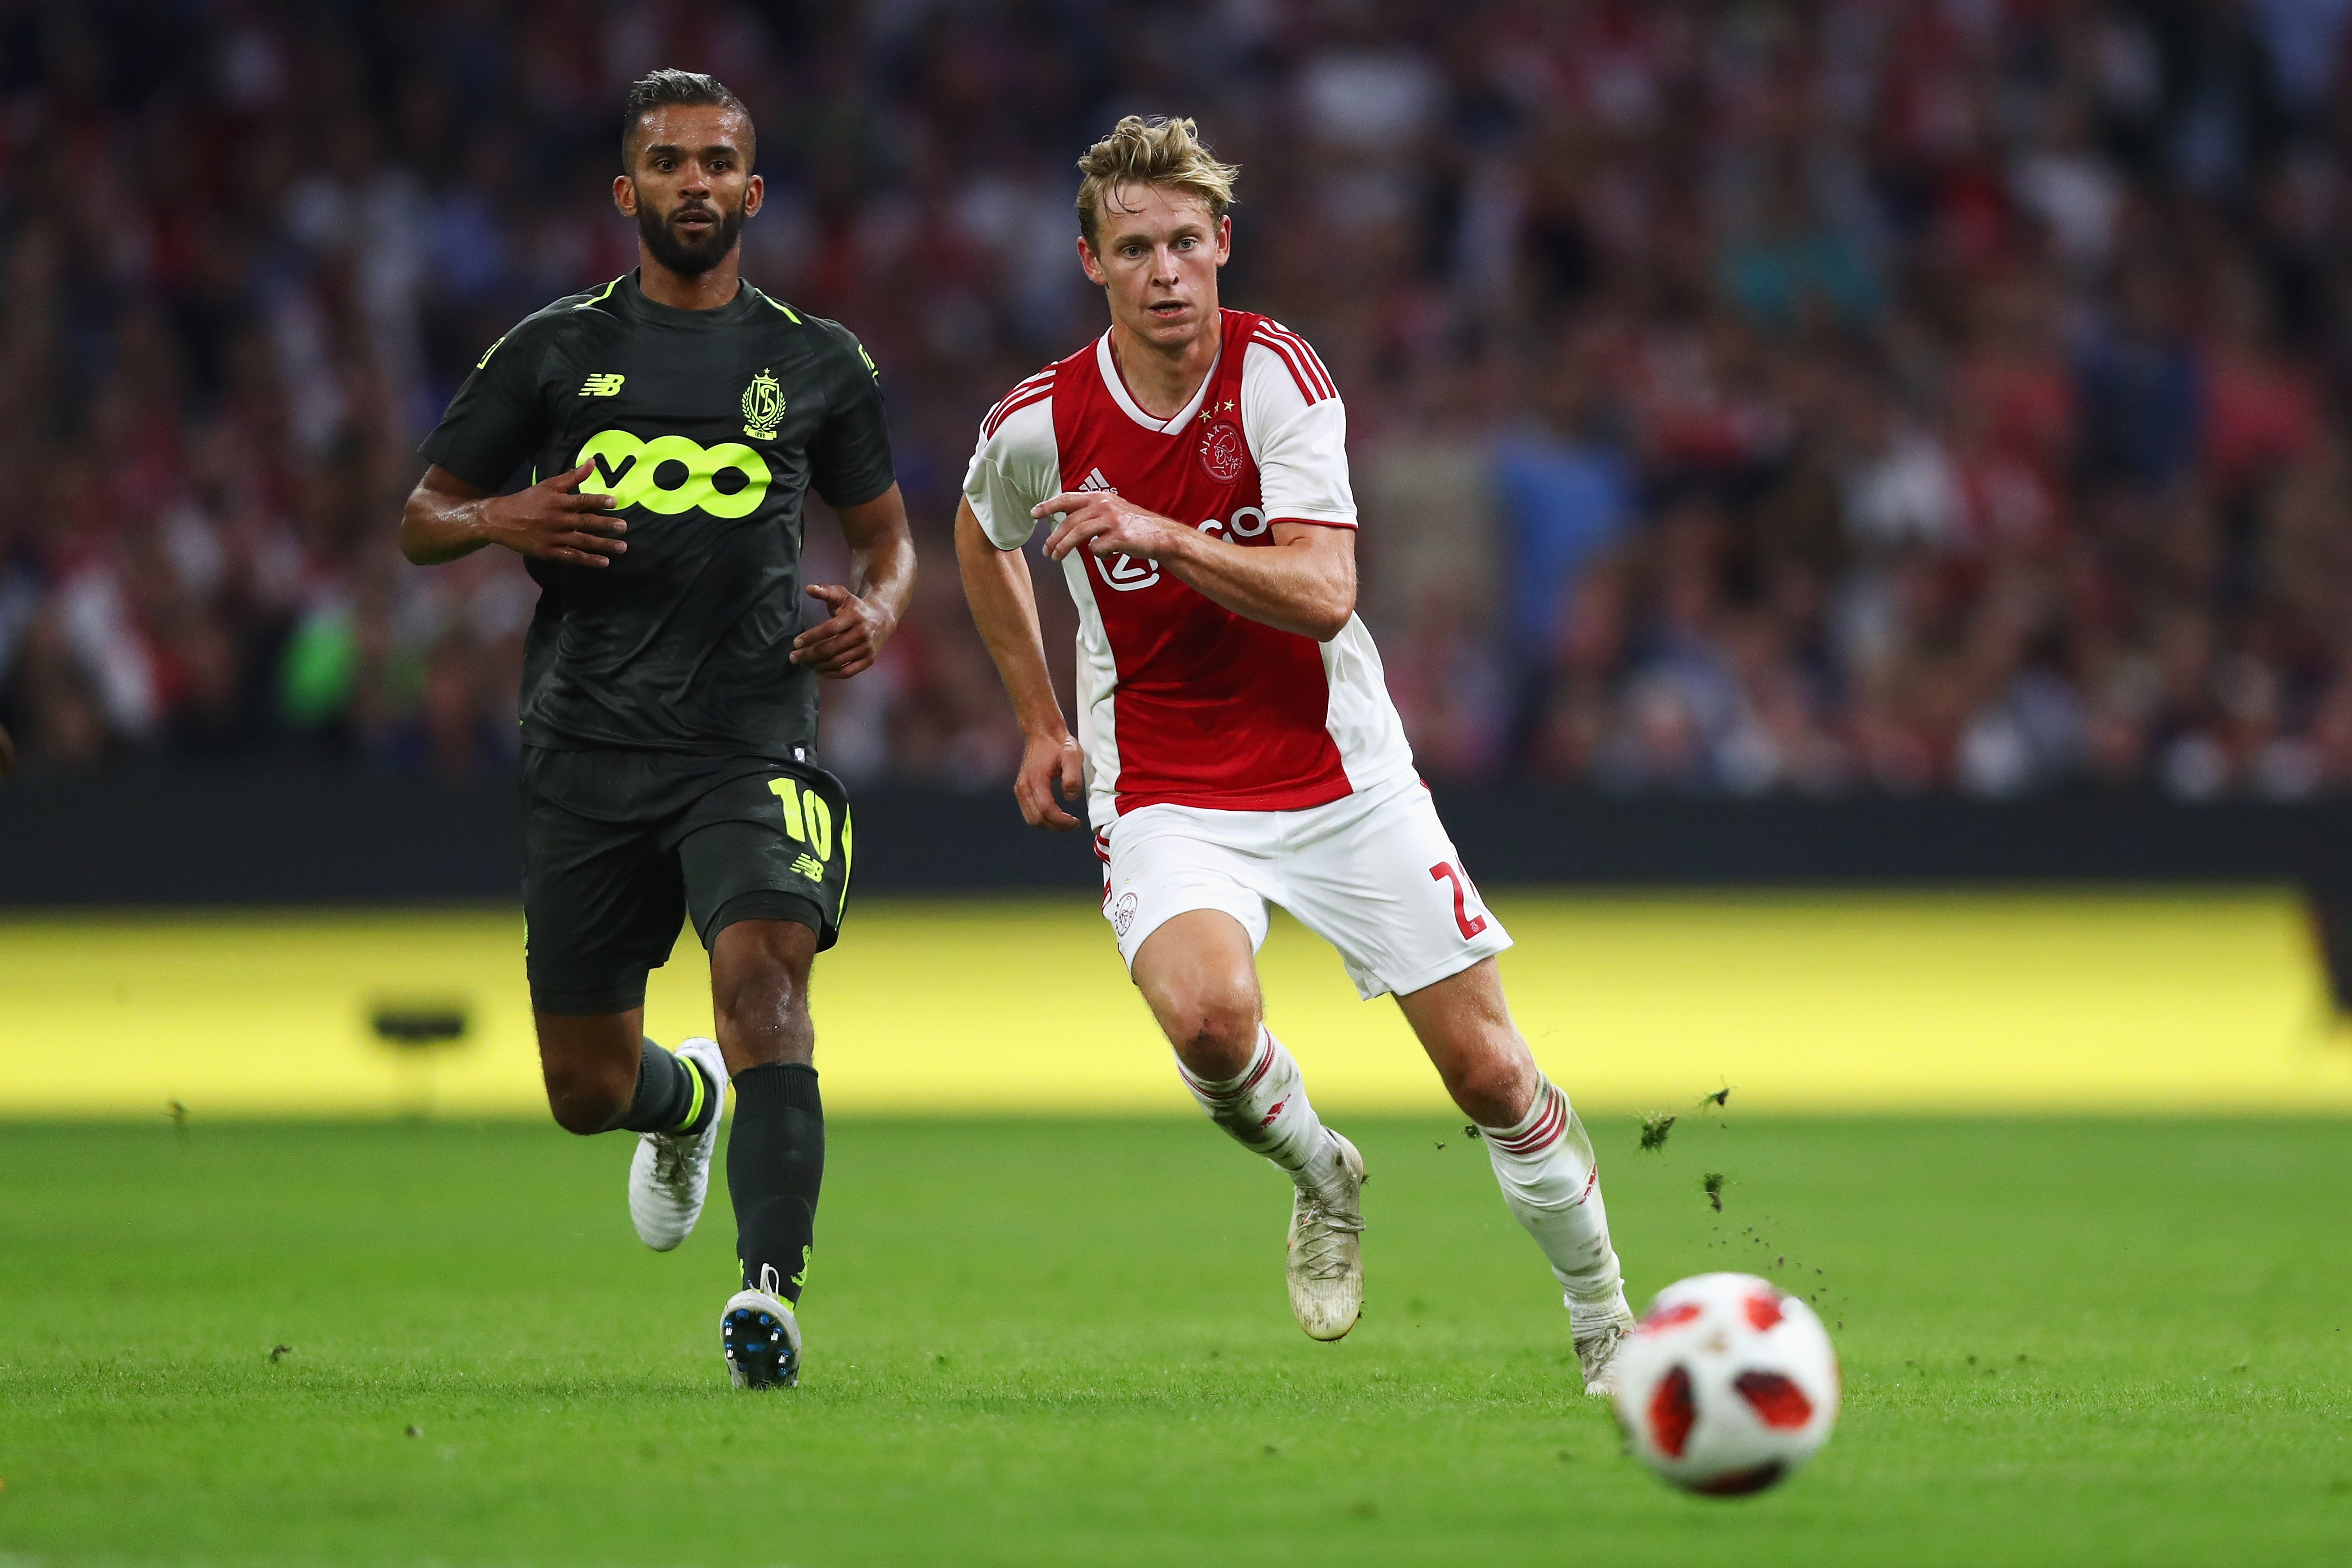 AMSTERDAM, NETHERLANDS - AUGUST 14:  Frenkie de Jong of Ajax battles for the ball with Mehdi Carcela-Gonzalez of Standard de Liege during the UEFA Champions League third round qualifying match between Ajax and Royal Standard de Liege at Johan Cruyff Arena on August 14, 2018 in Amsterdam, Netherlands.  (Photo by Dean Mouhtaropoulos/Getty Images)